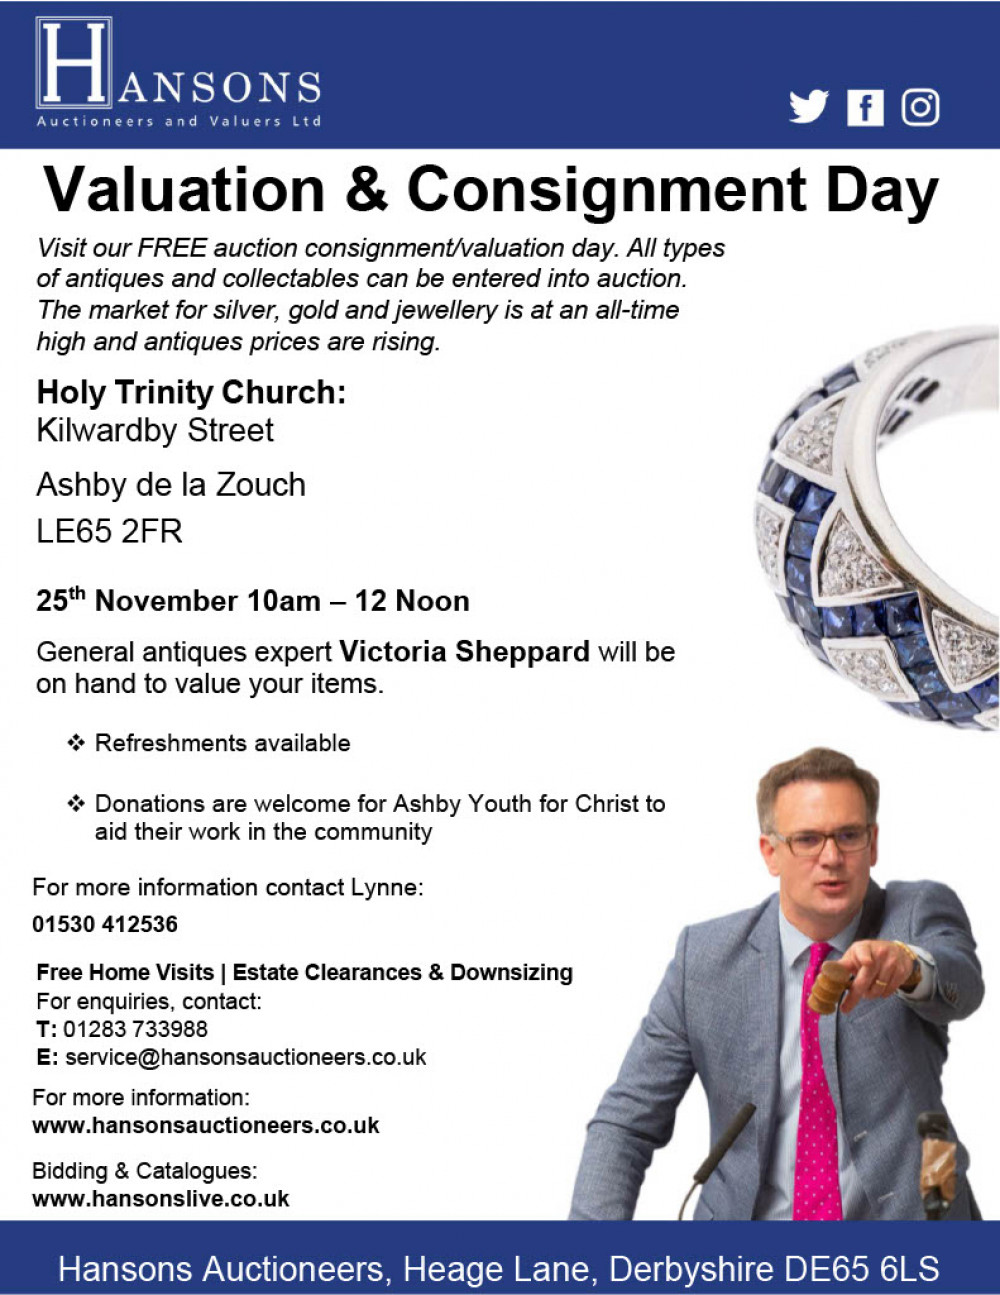 The Hansons Valuation Event is at Holy Trinity Church, Ashby de la Zouch